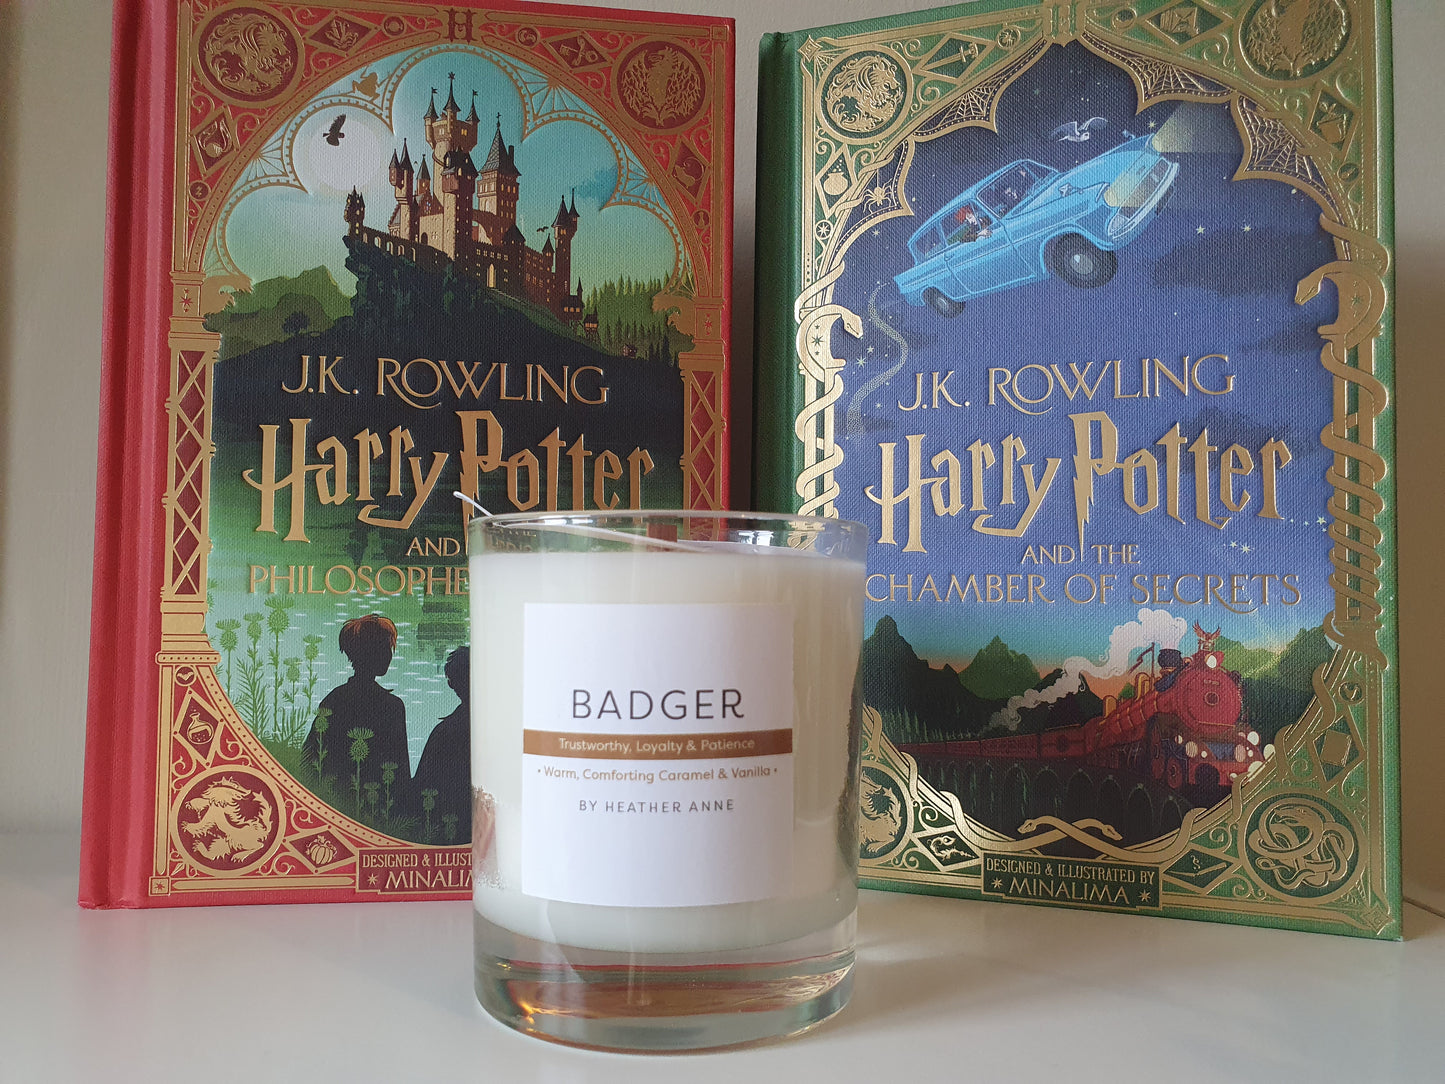 Badger Candle - Trustworthy, Loyalty & Patience